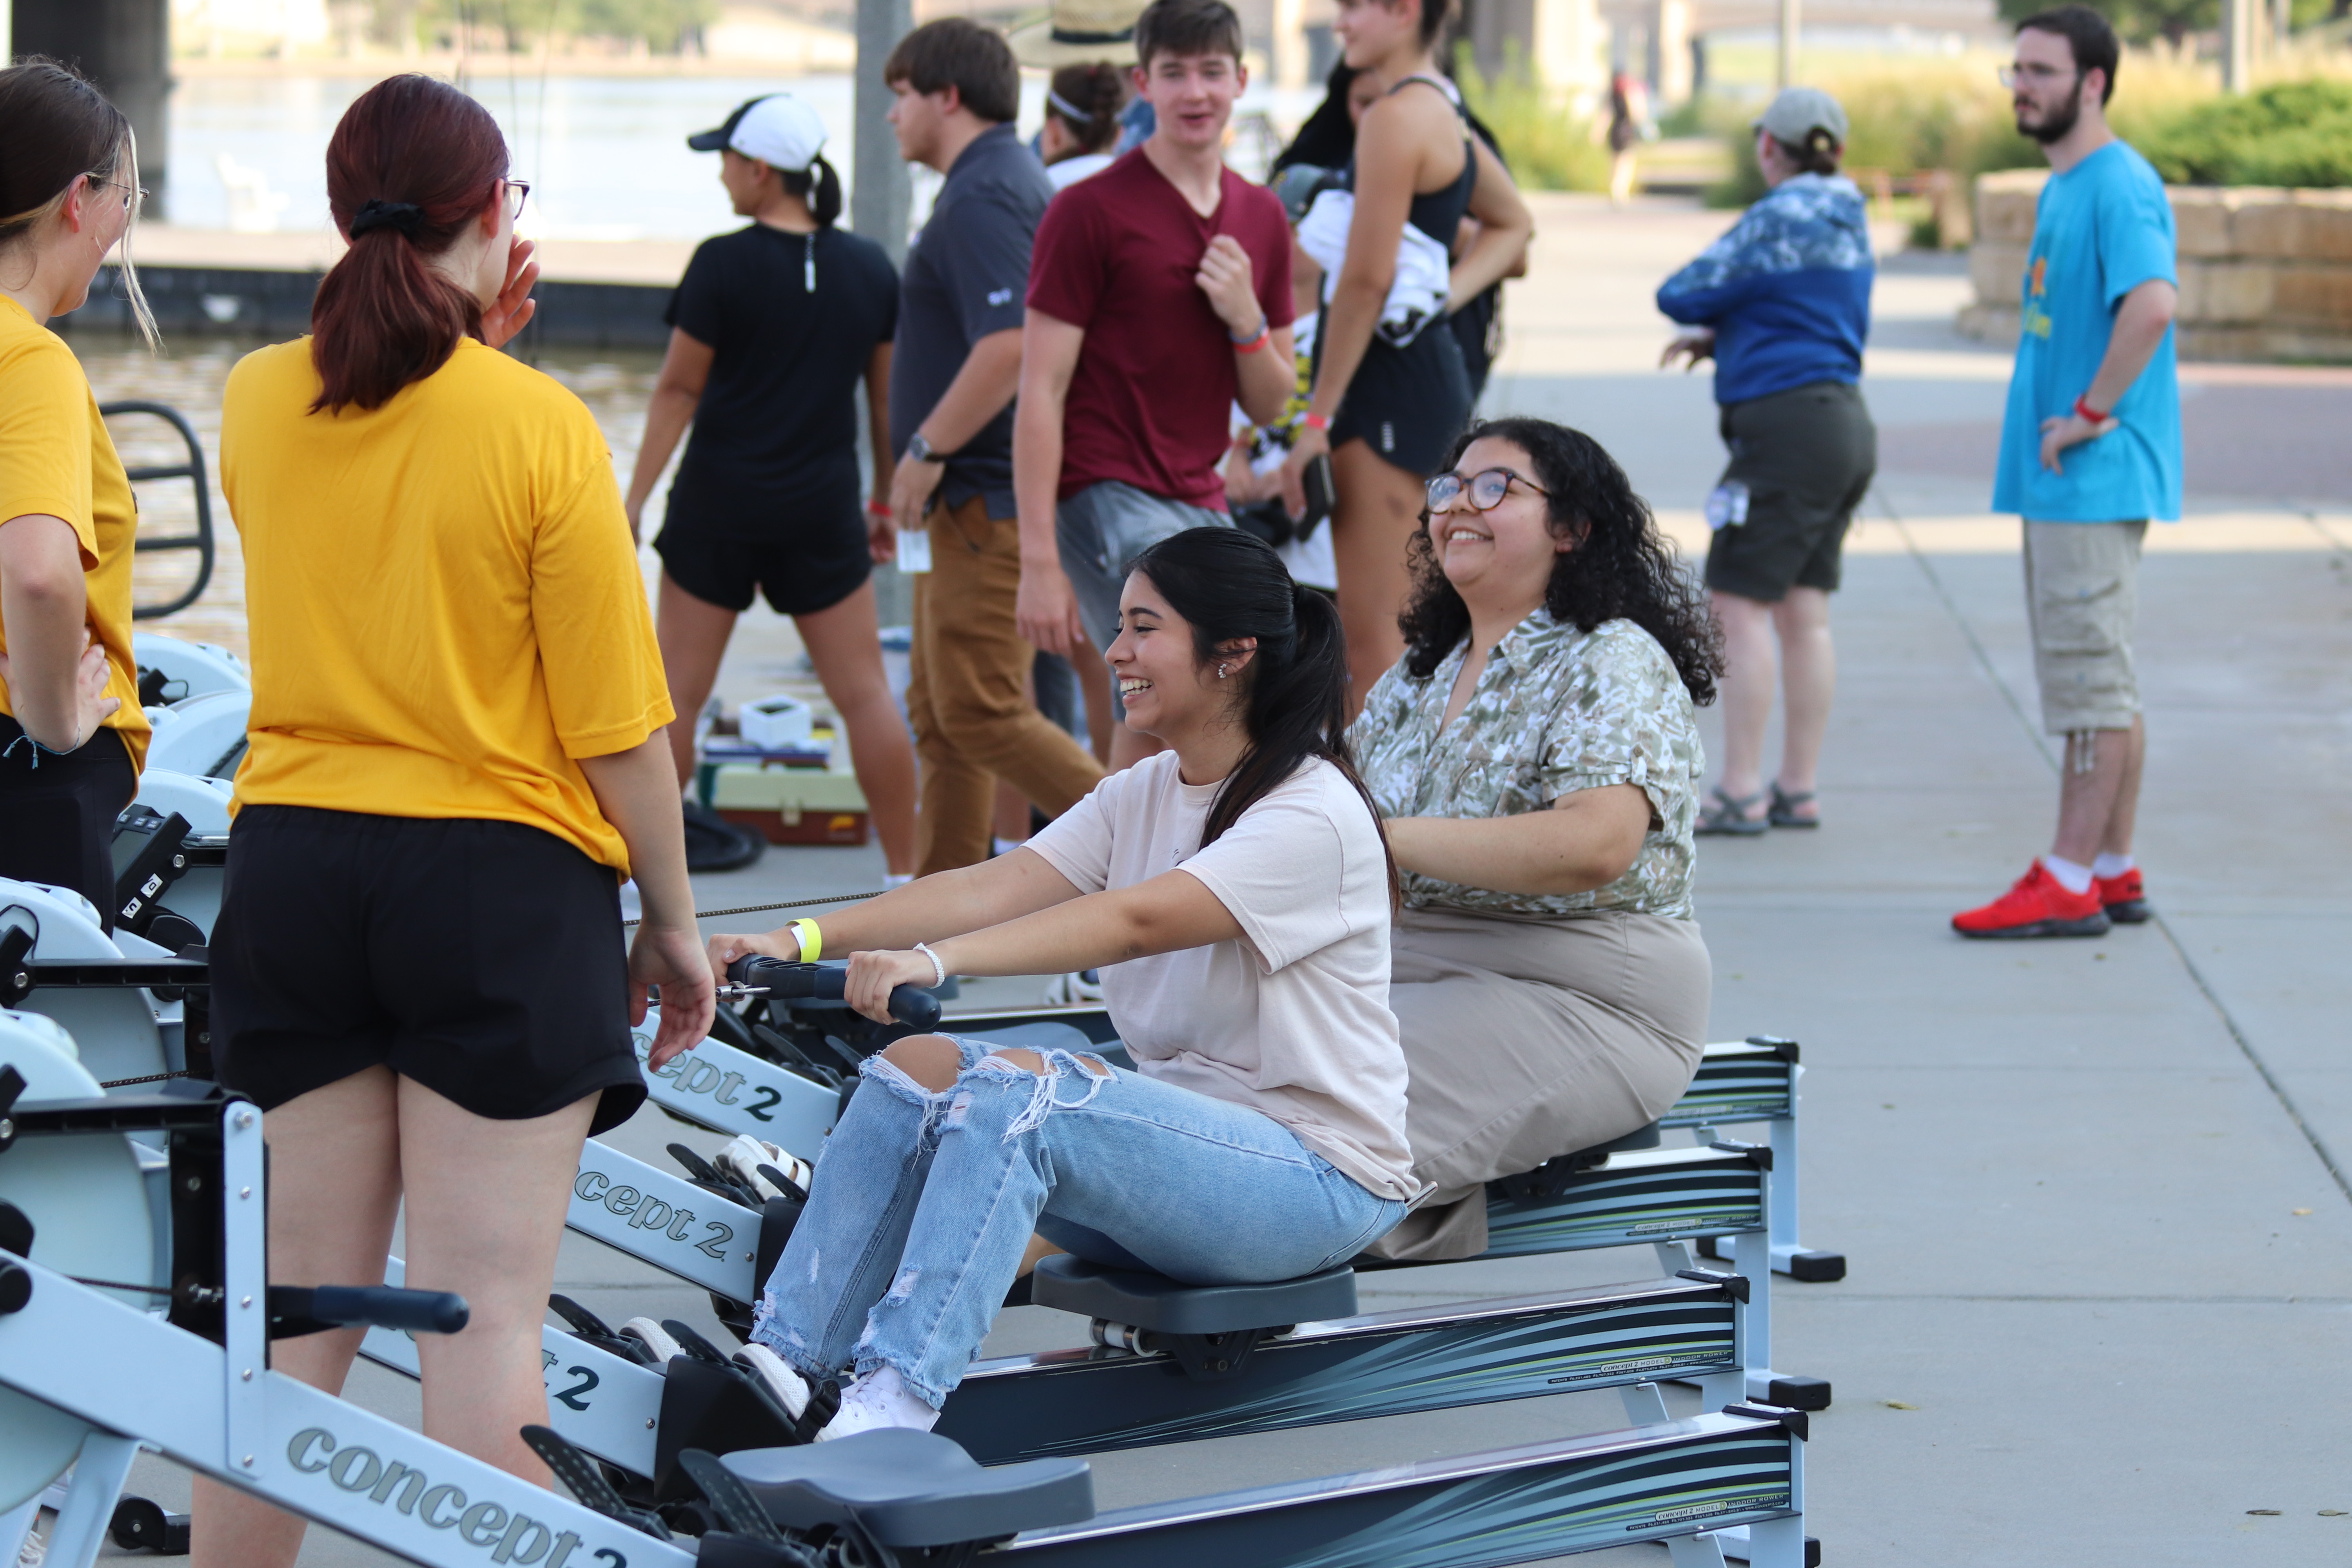 students on the erg machines